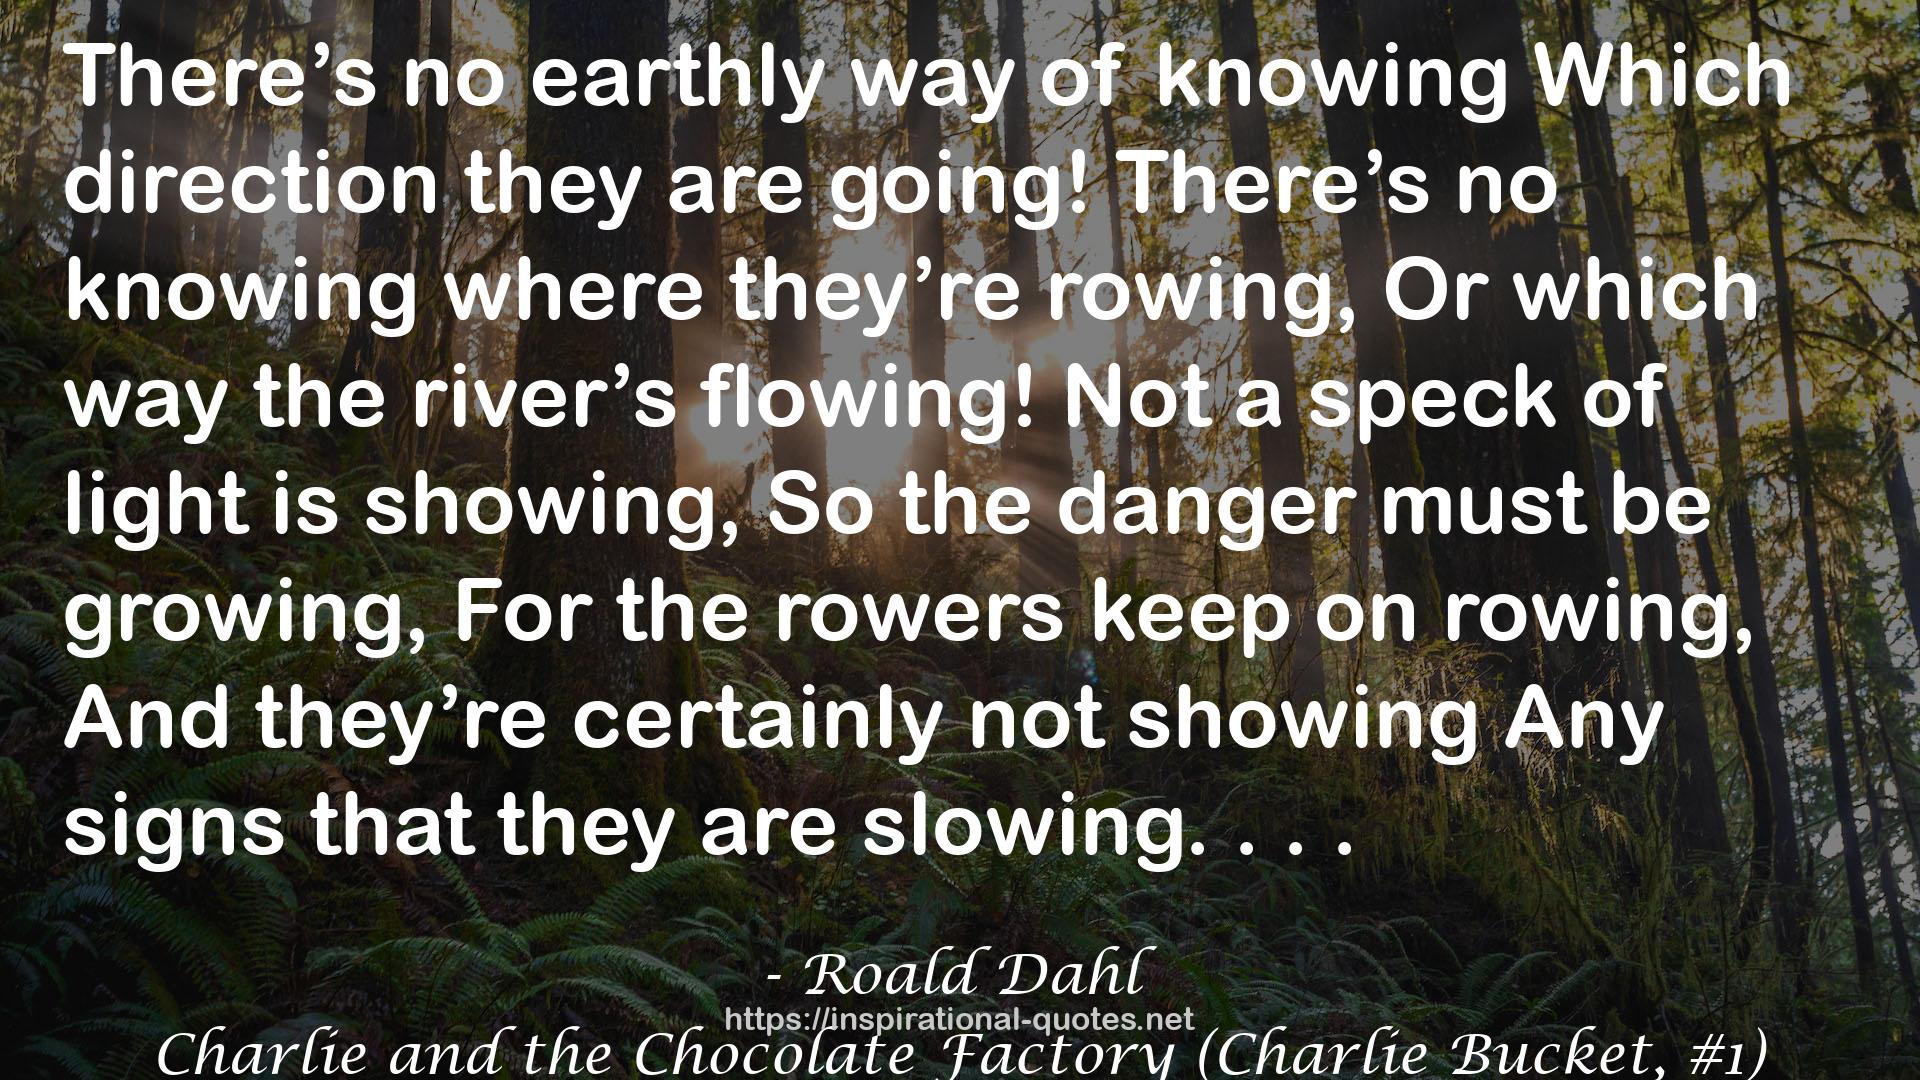 Charlie and the Chocolate Factory (Charlie Bucket, #1) QUOTES